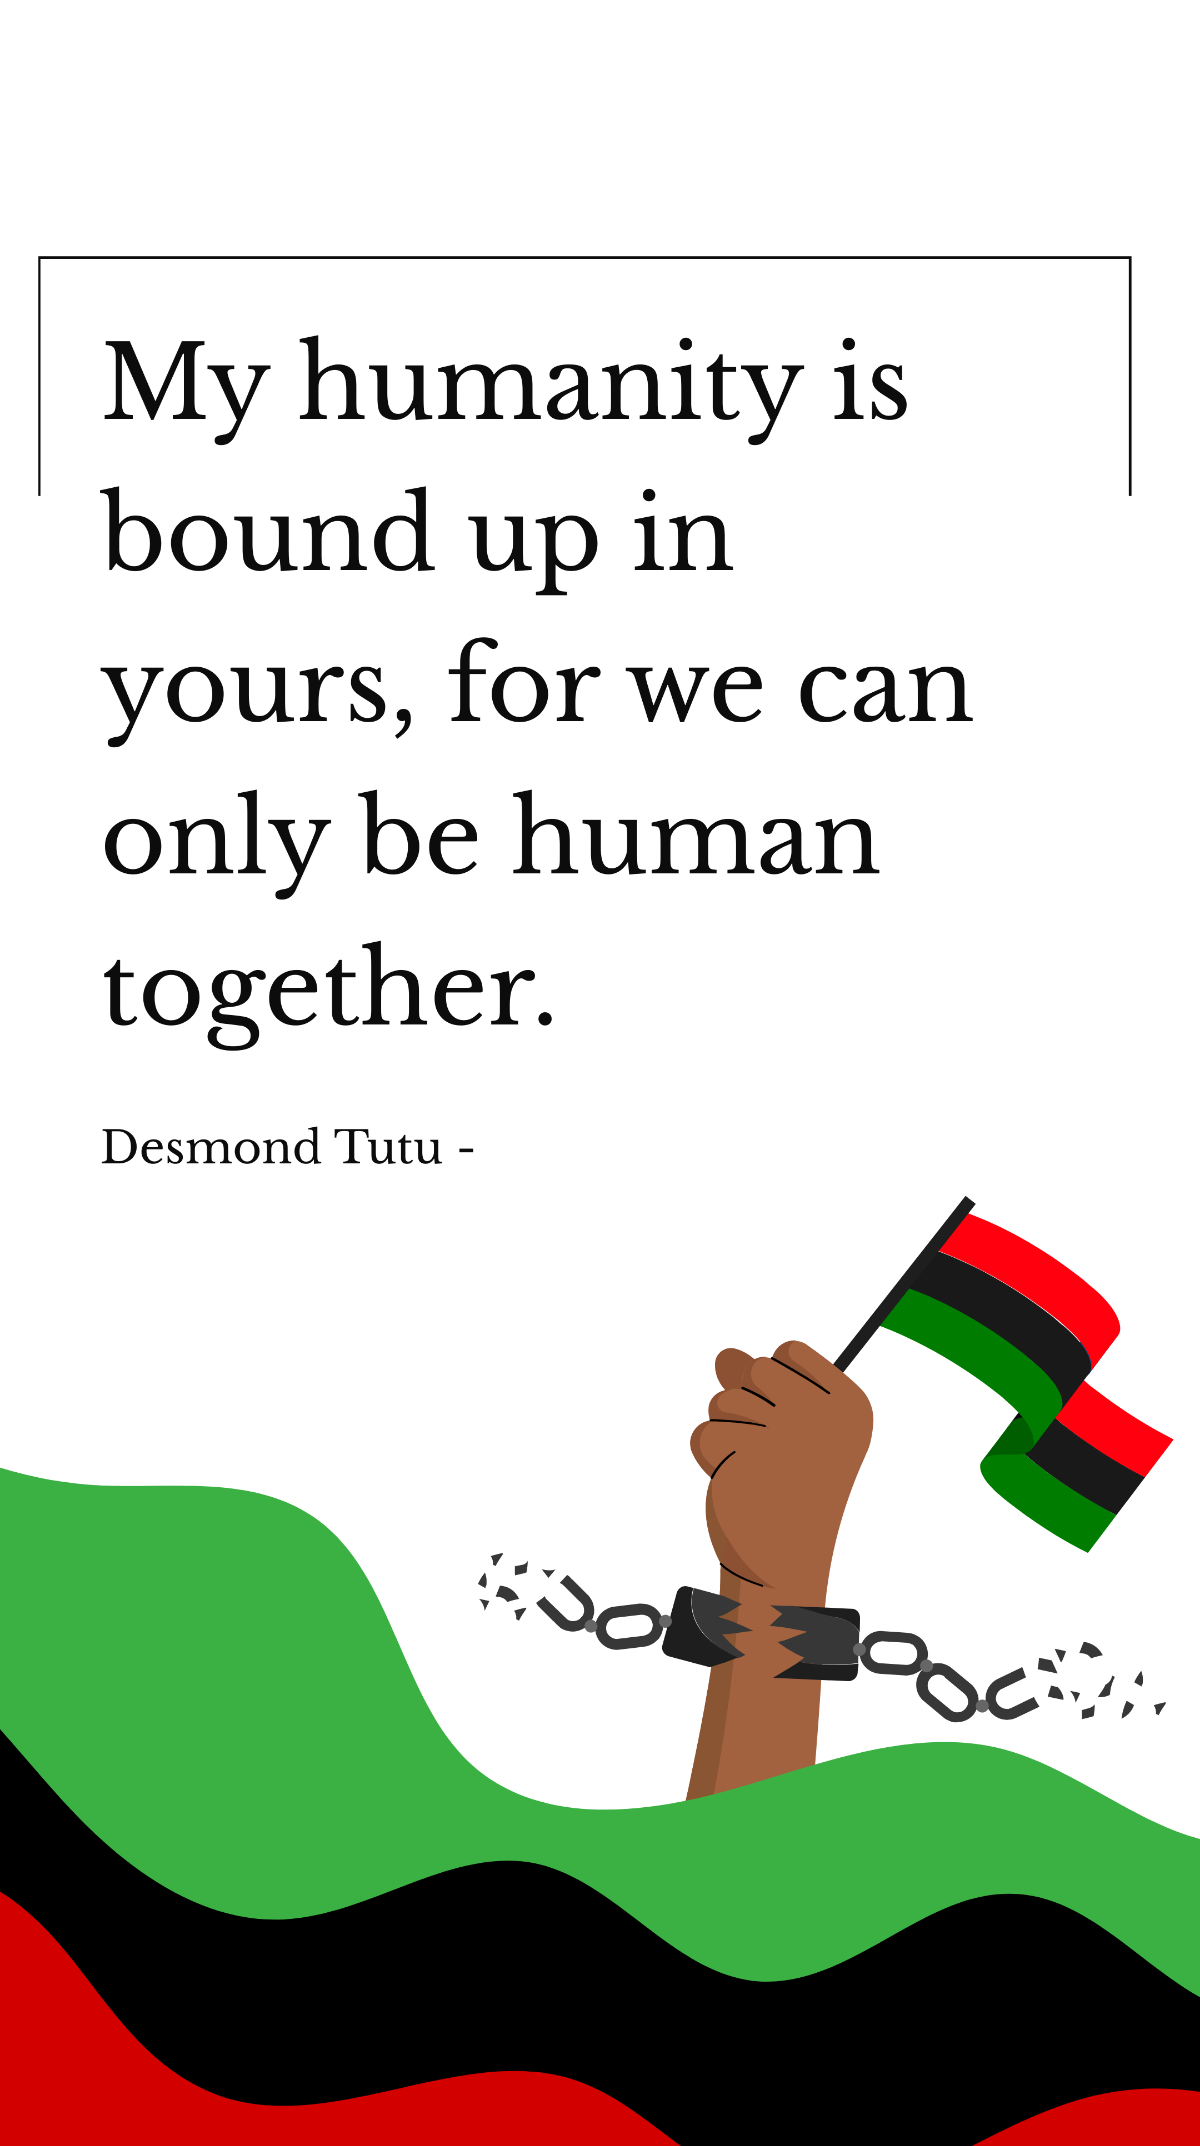 Desmond Tutu - My humanity is bound up in yours, for we can only be human together.